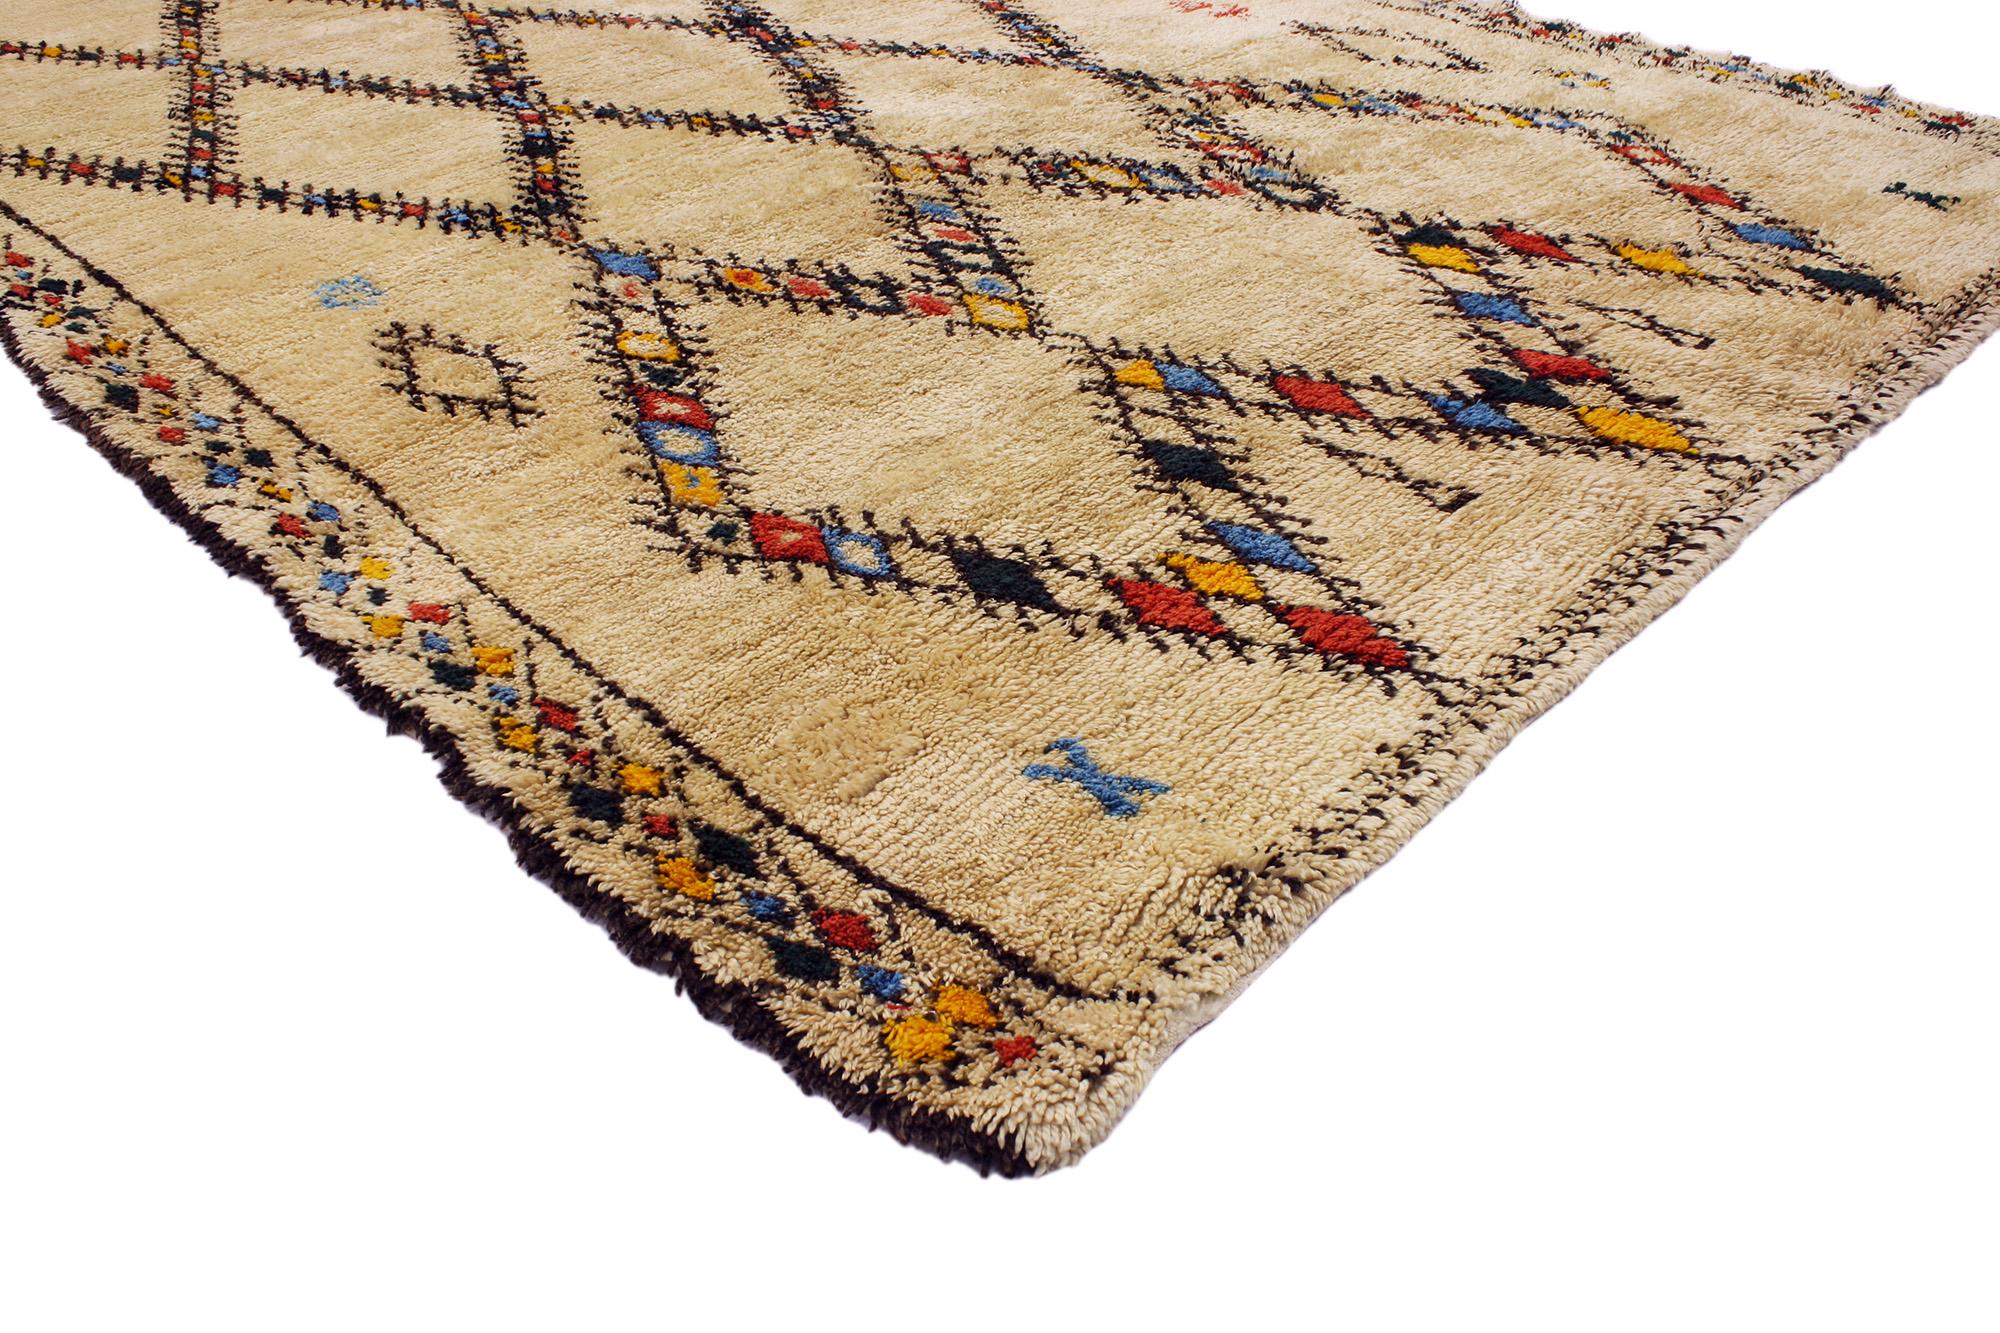 20348 Vintage Beni Ourain Moroccan Rug, 06'07 x 10'00. Emerging from the esteemed Beni Ourain tribe in Morocco, these meticulously crafted rugs honor tradition with painstaking craftsmanship. Made from untreated sheep's wool, they impart spaces with